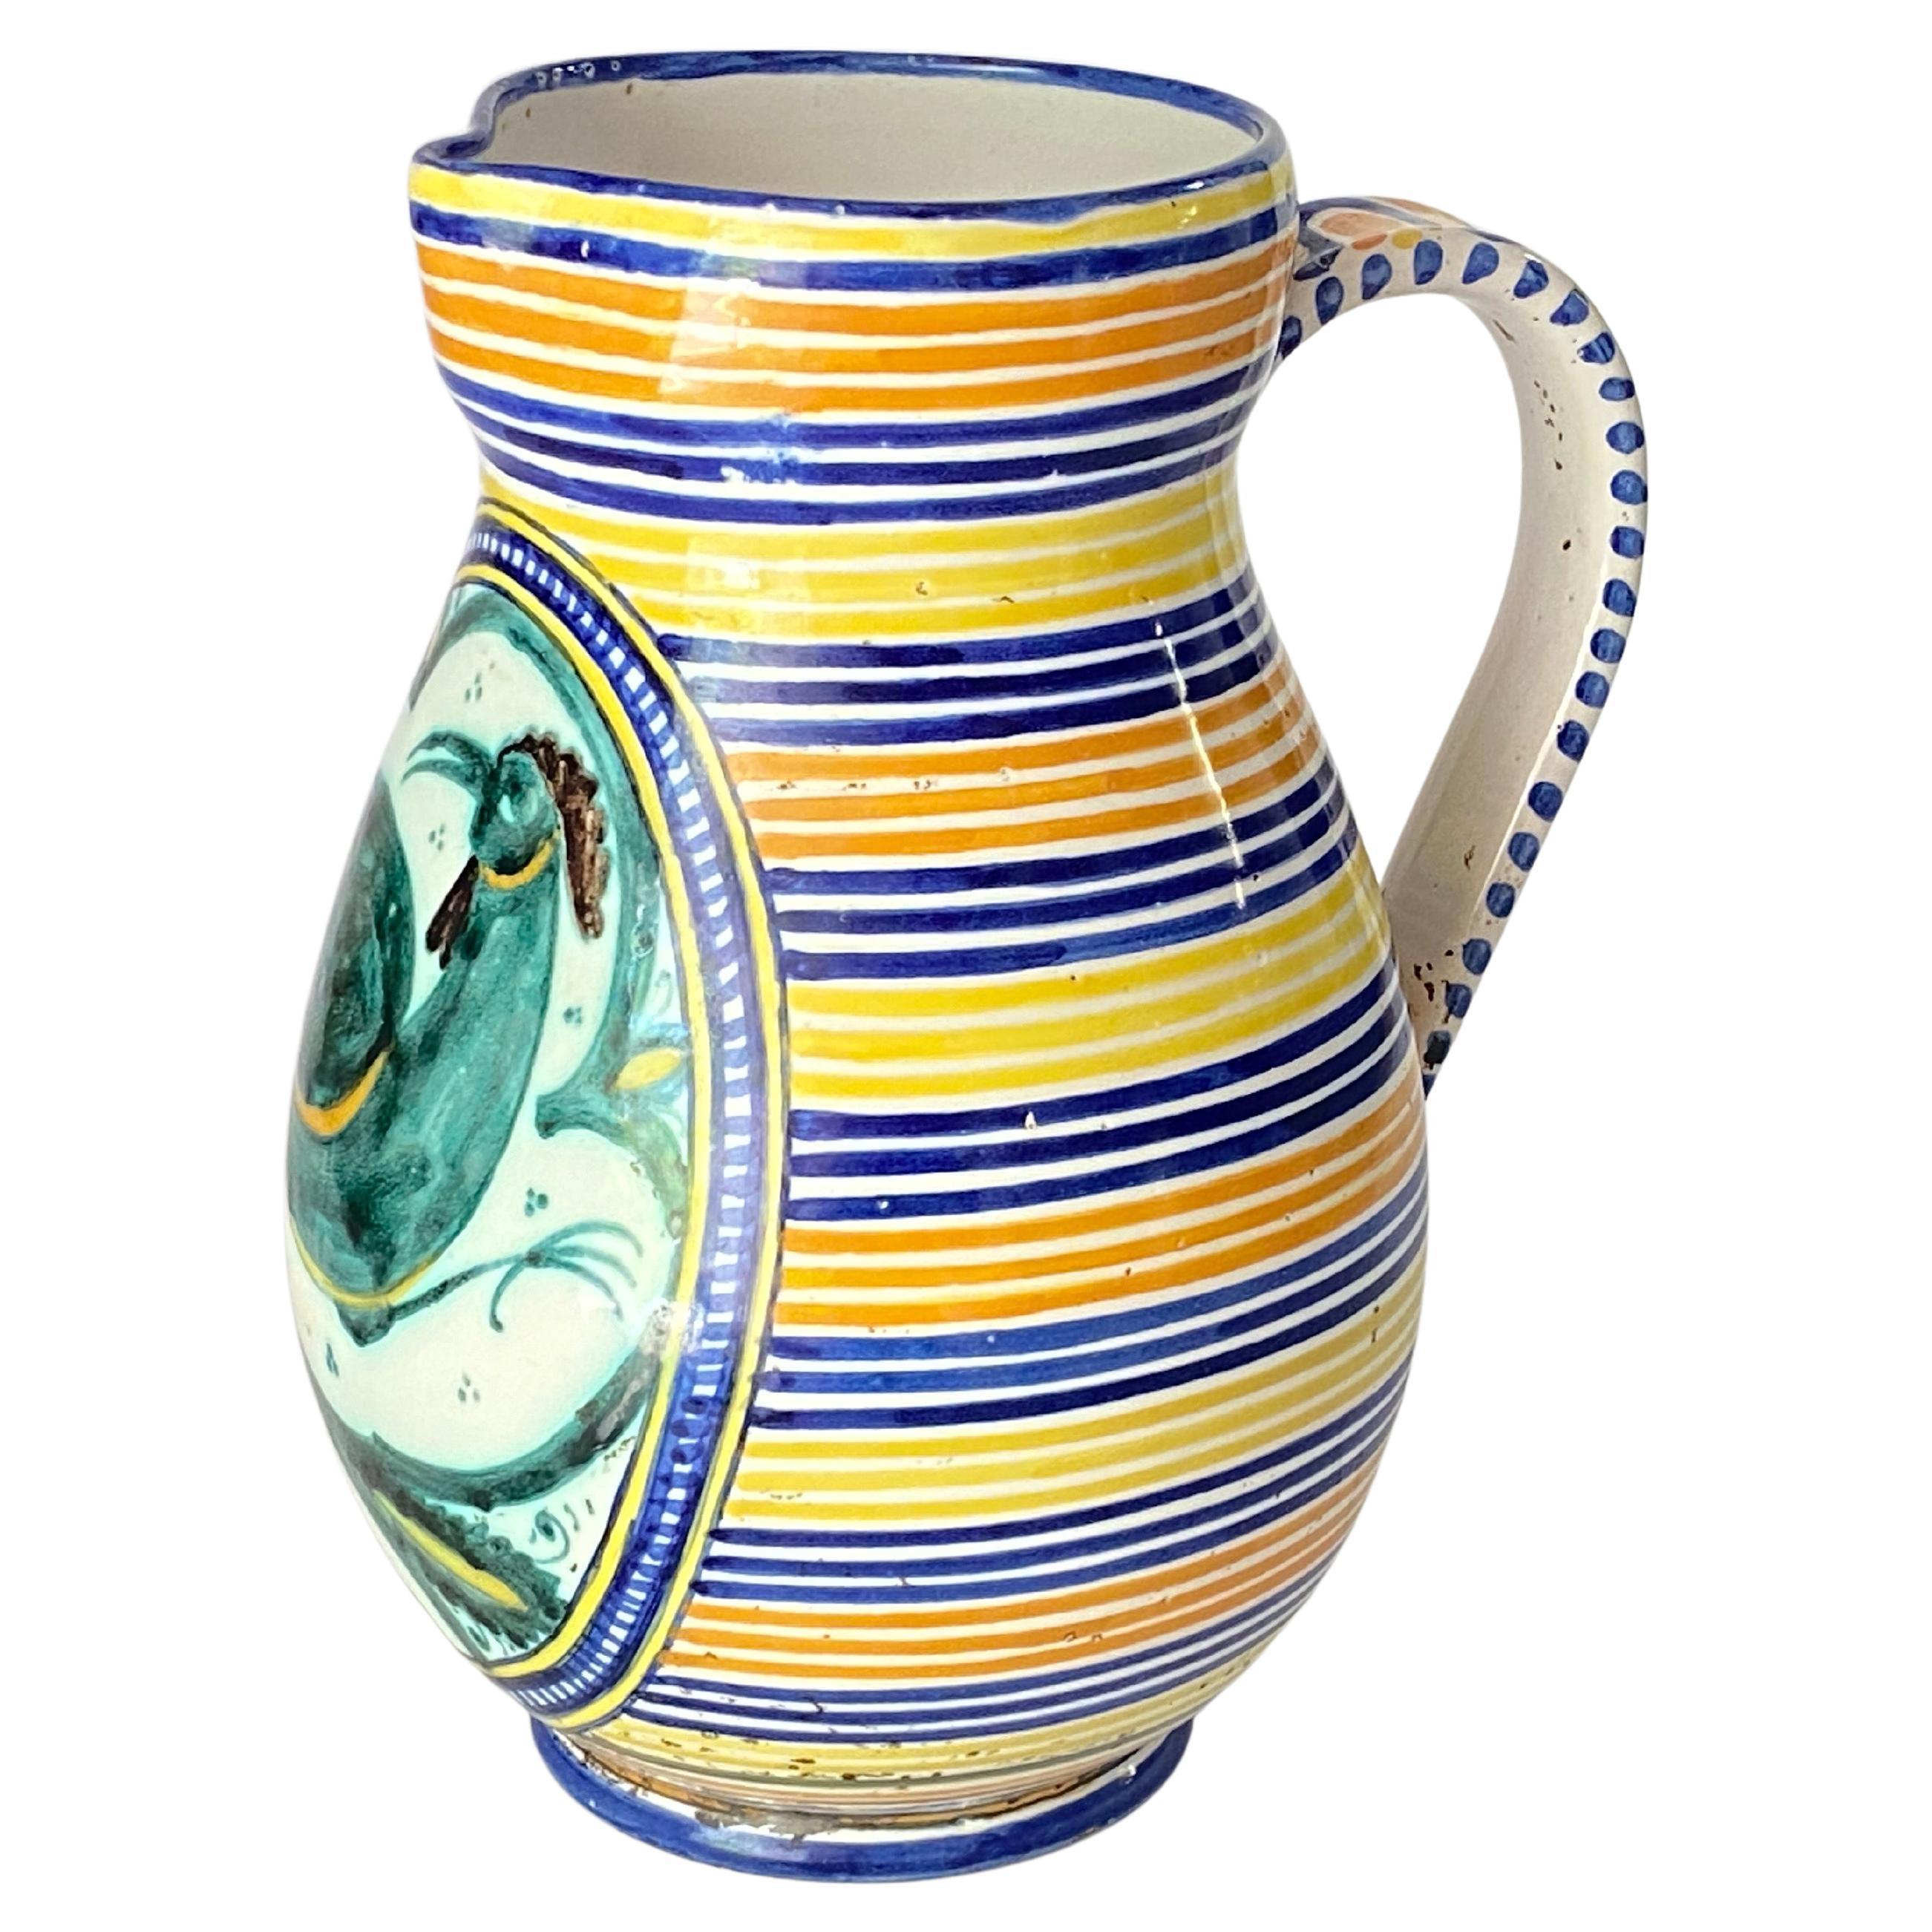 Ceramic Jug or Pitcher with White Bue Yellow Color Gubbio, Italy, circa 1960